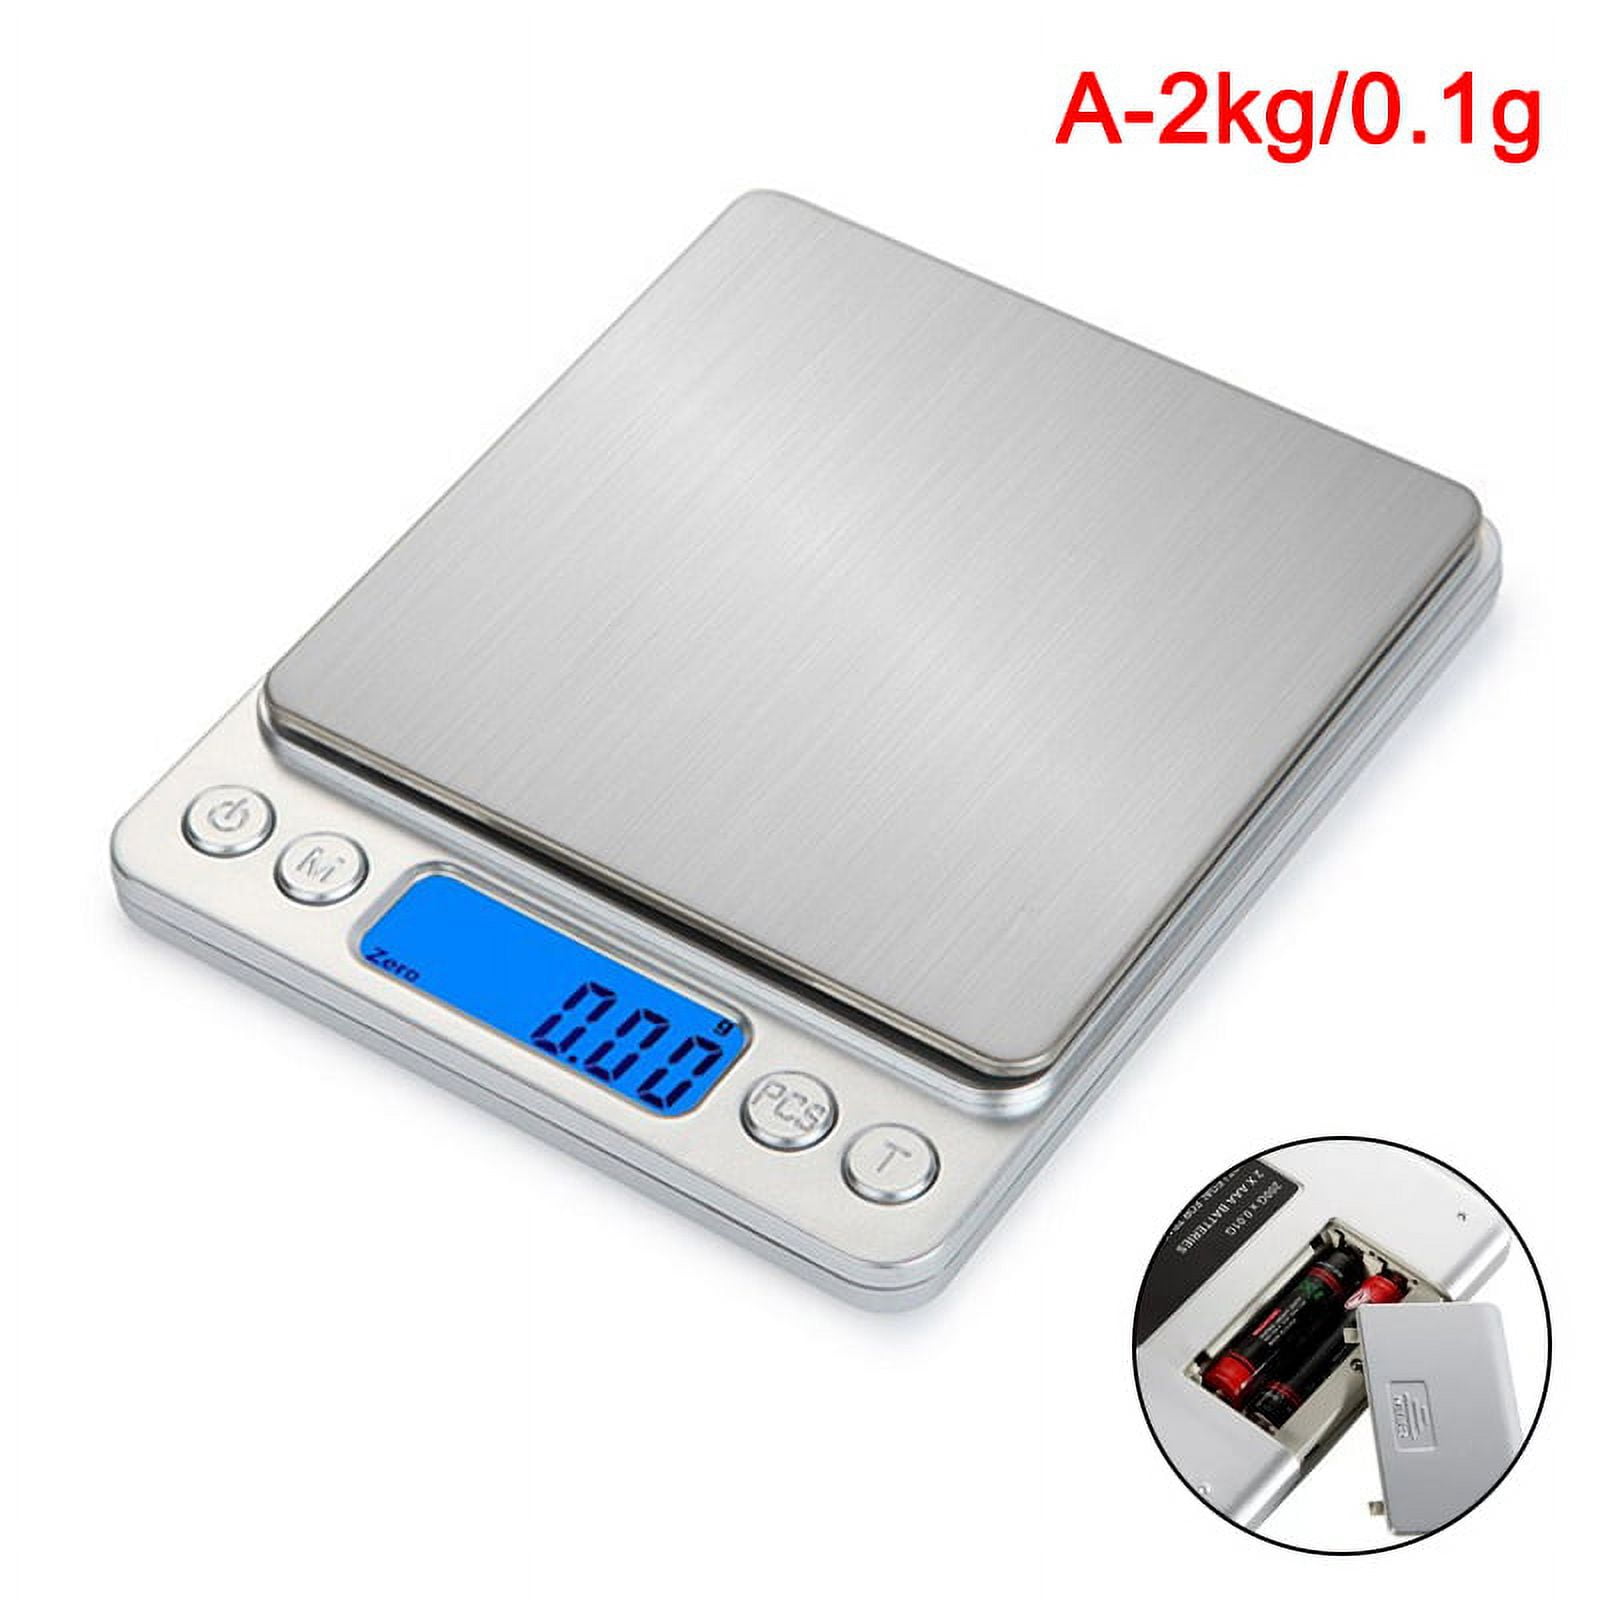 Mini Pocket Scale, 1kg x 0.01g Accuracy, Gram Scale Small Digital Kitchen  Scale for Baking, Jewelry, Herbs, Seasoning,Tare Function, 2 Trays Included